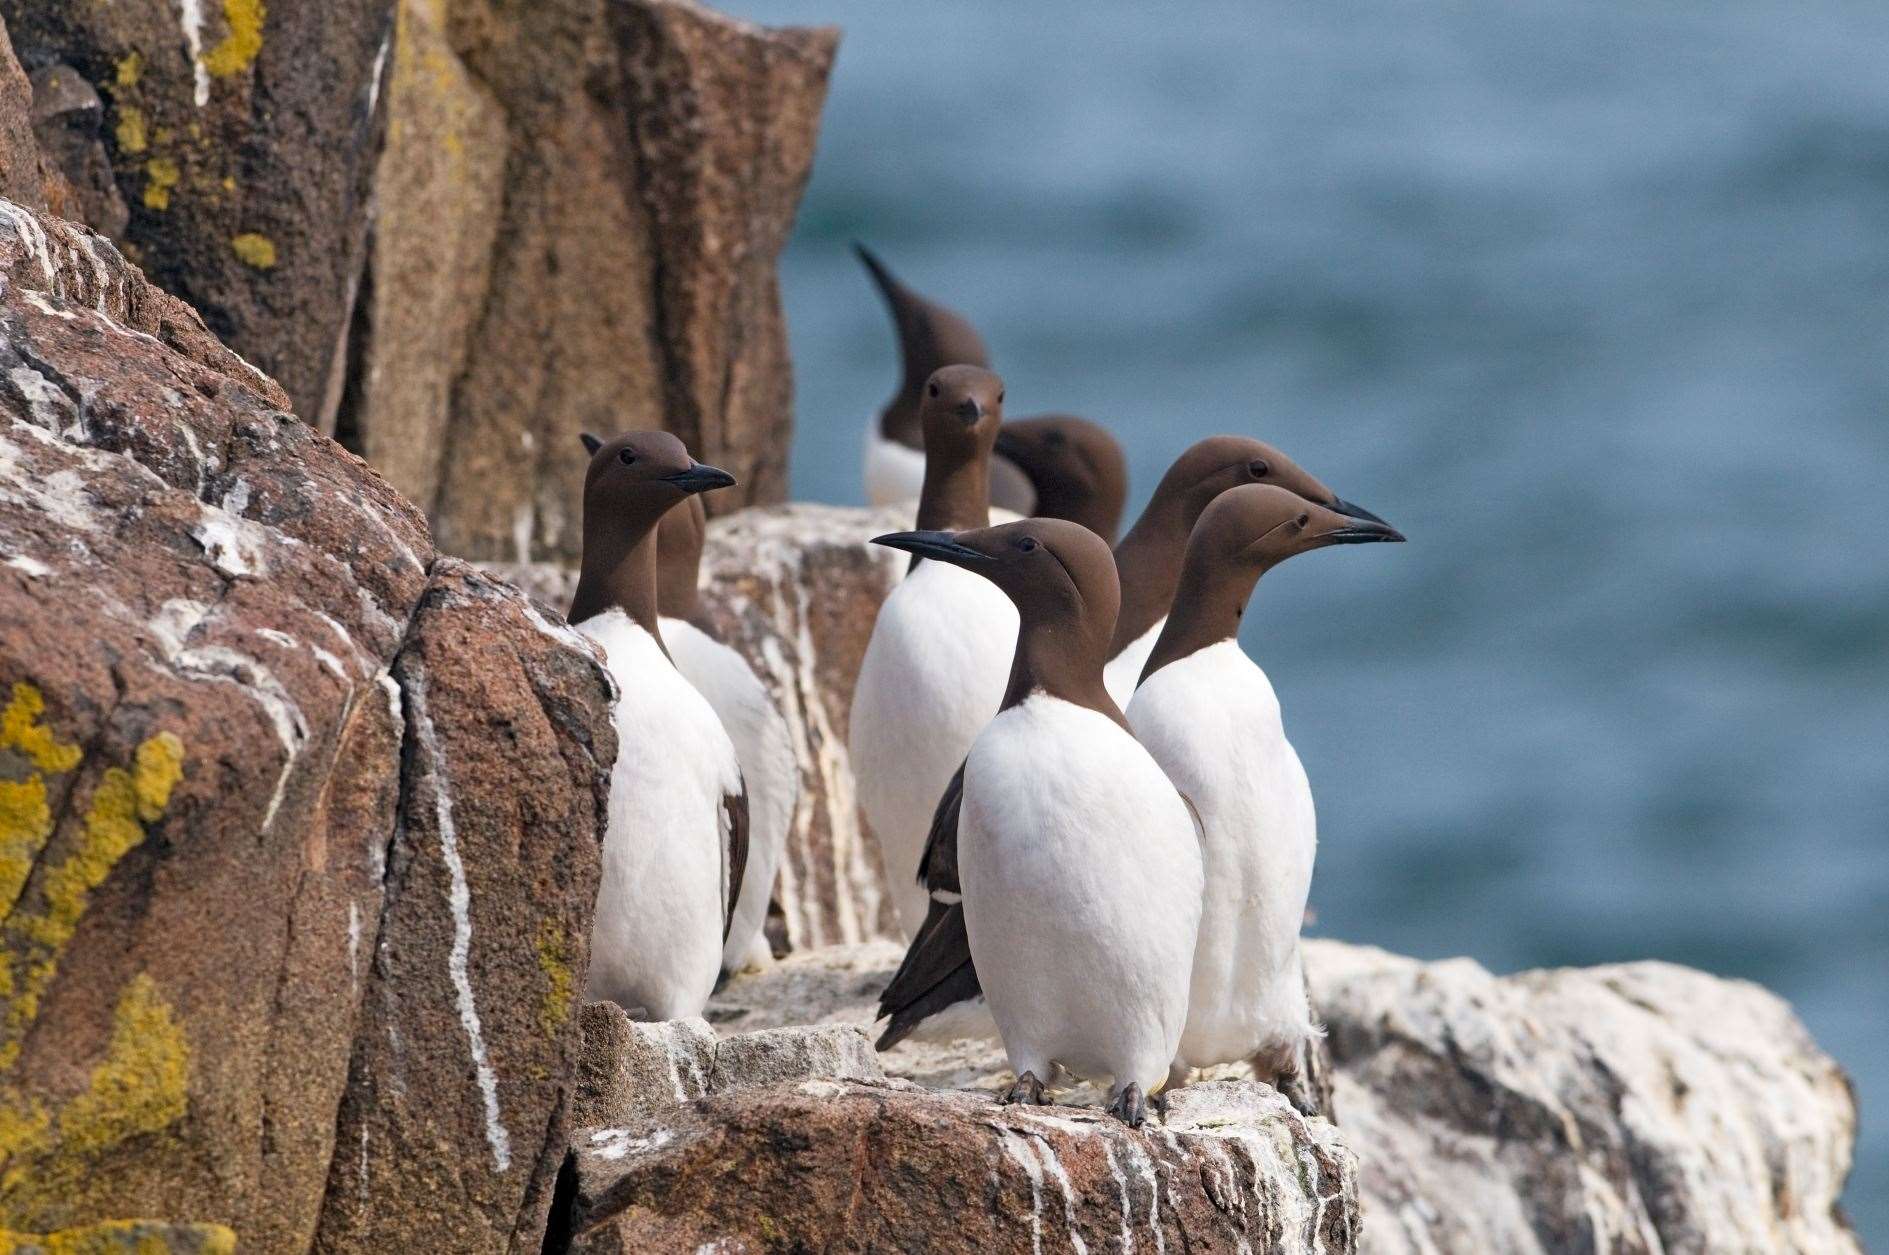 Guillemot deaths have been reported on the north coast. Picture: Lorne Gill/NatureScot